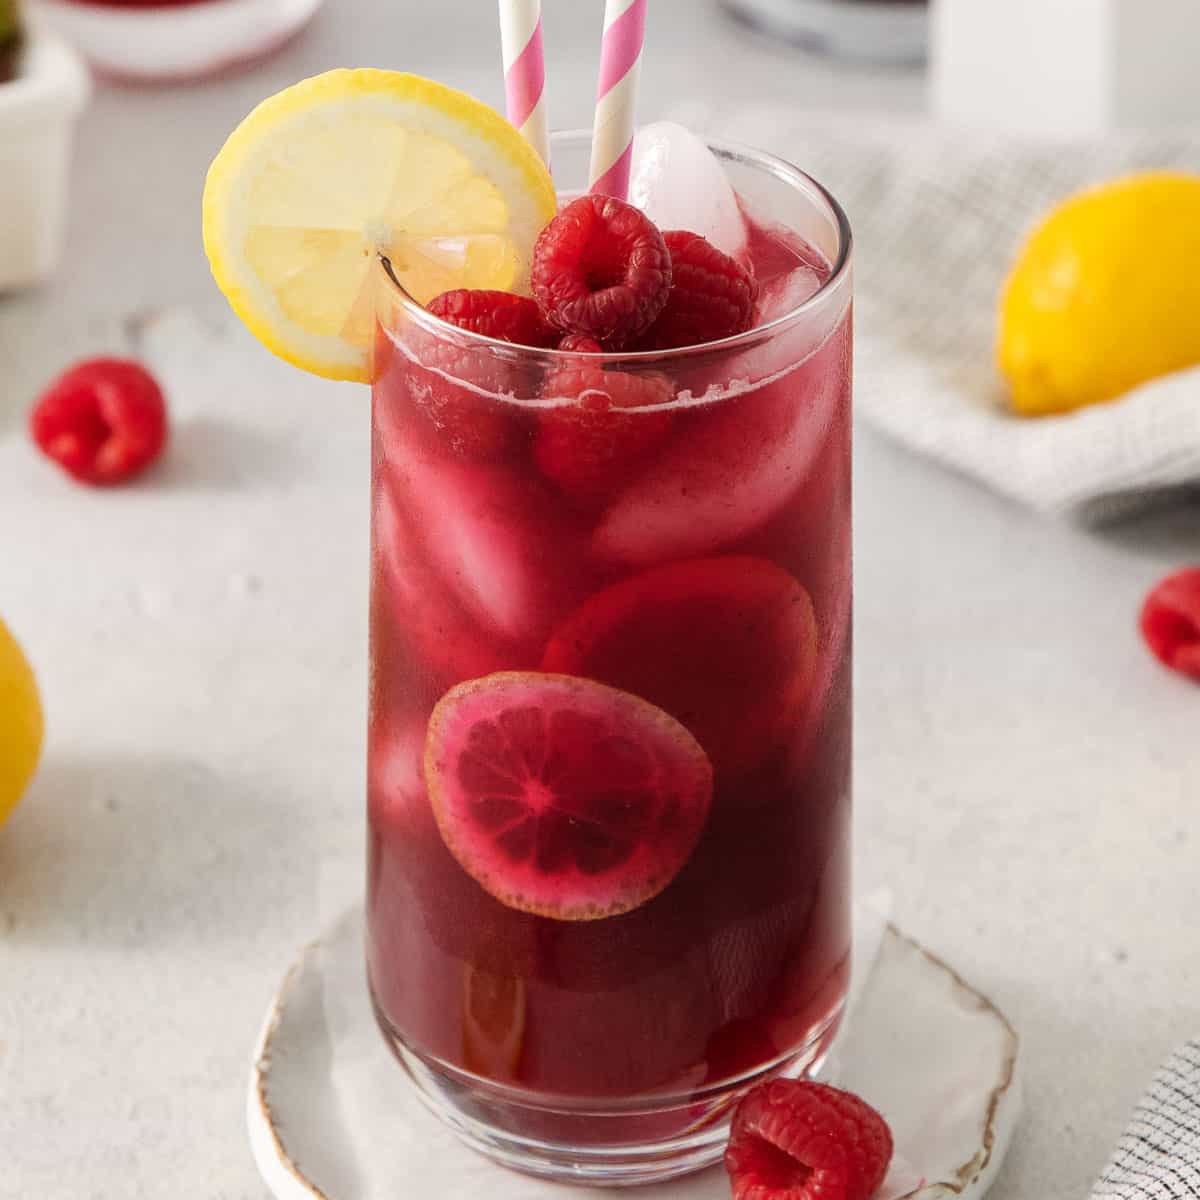 A close up photo of berry lemonade in a glass with two striped straws and a slice of lemon on the side